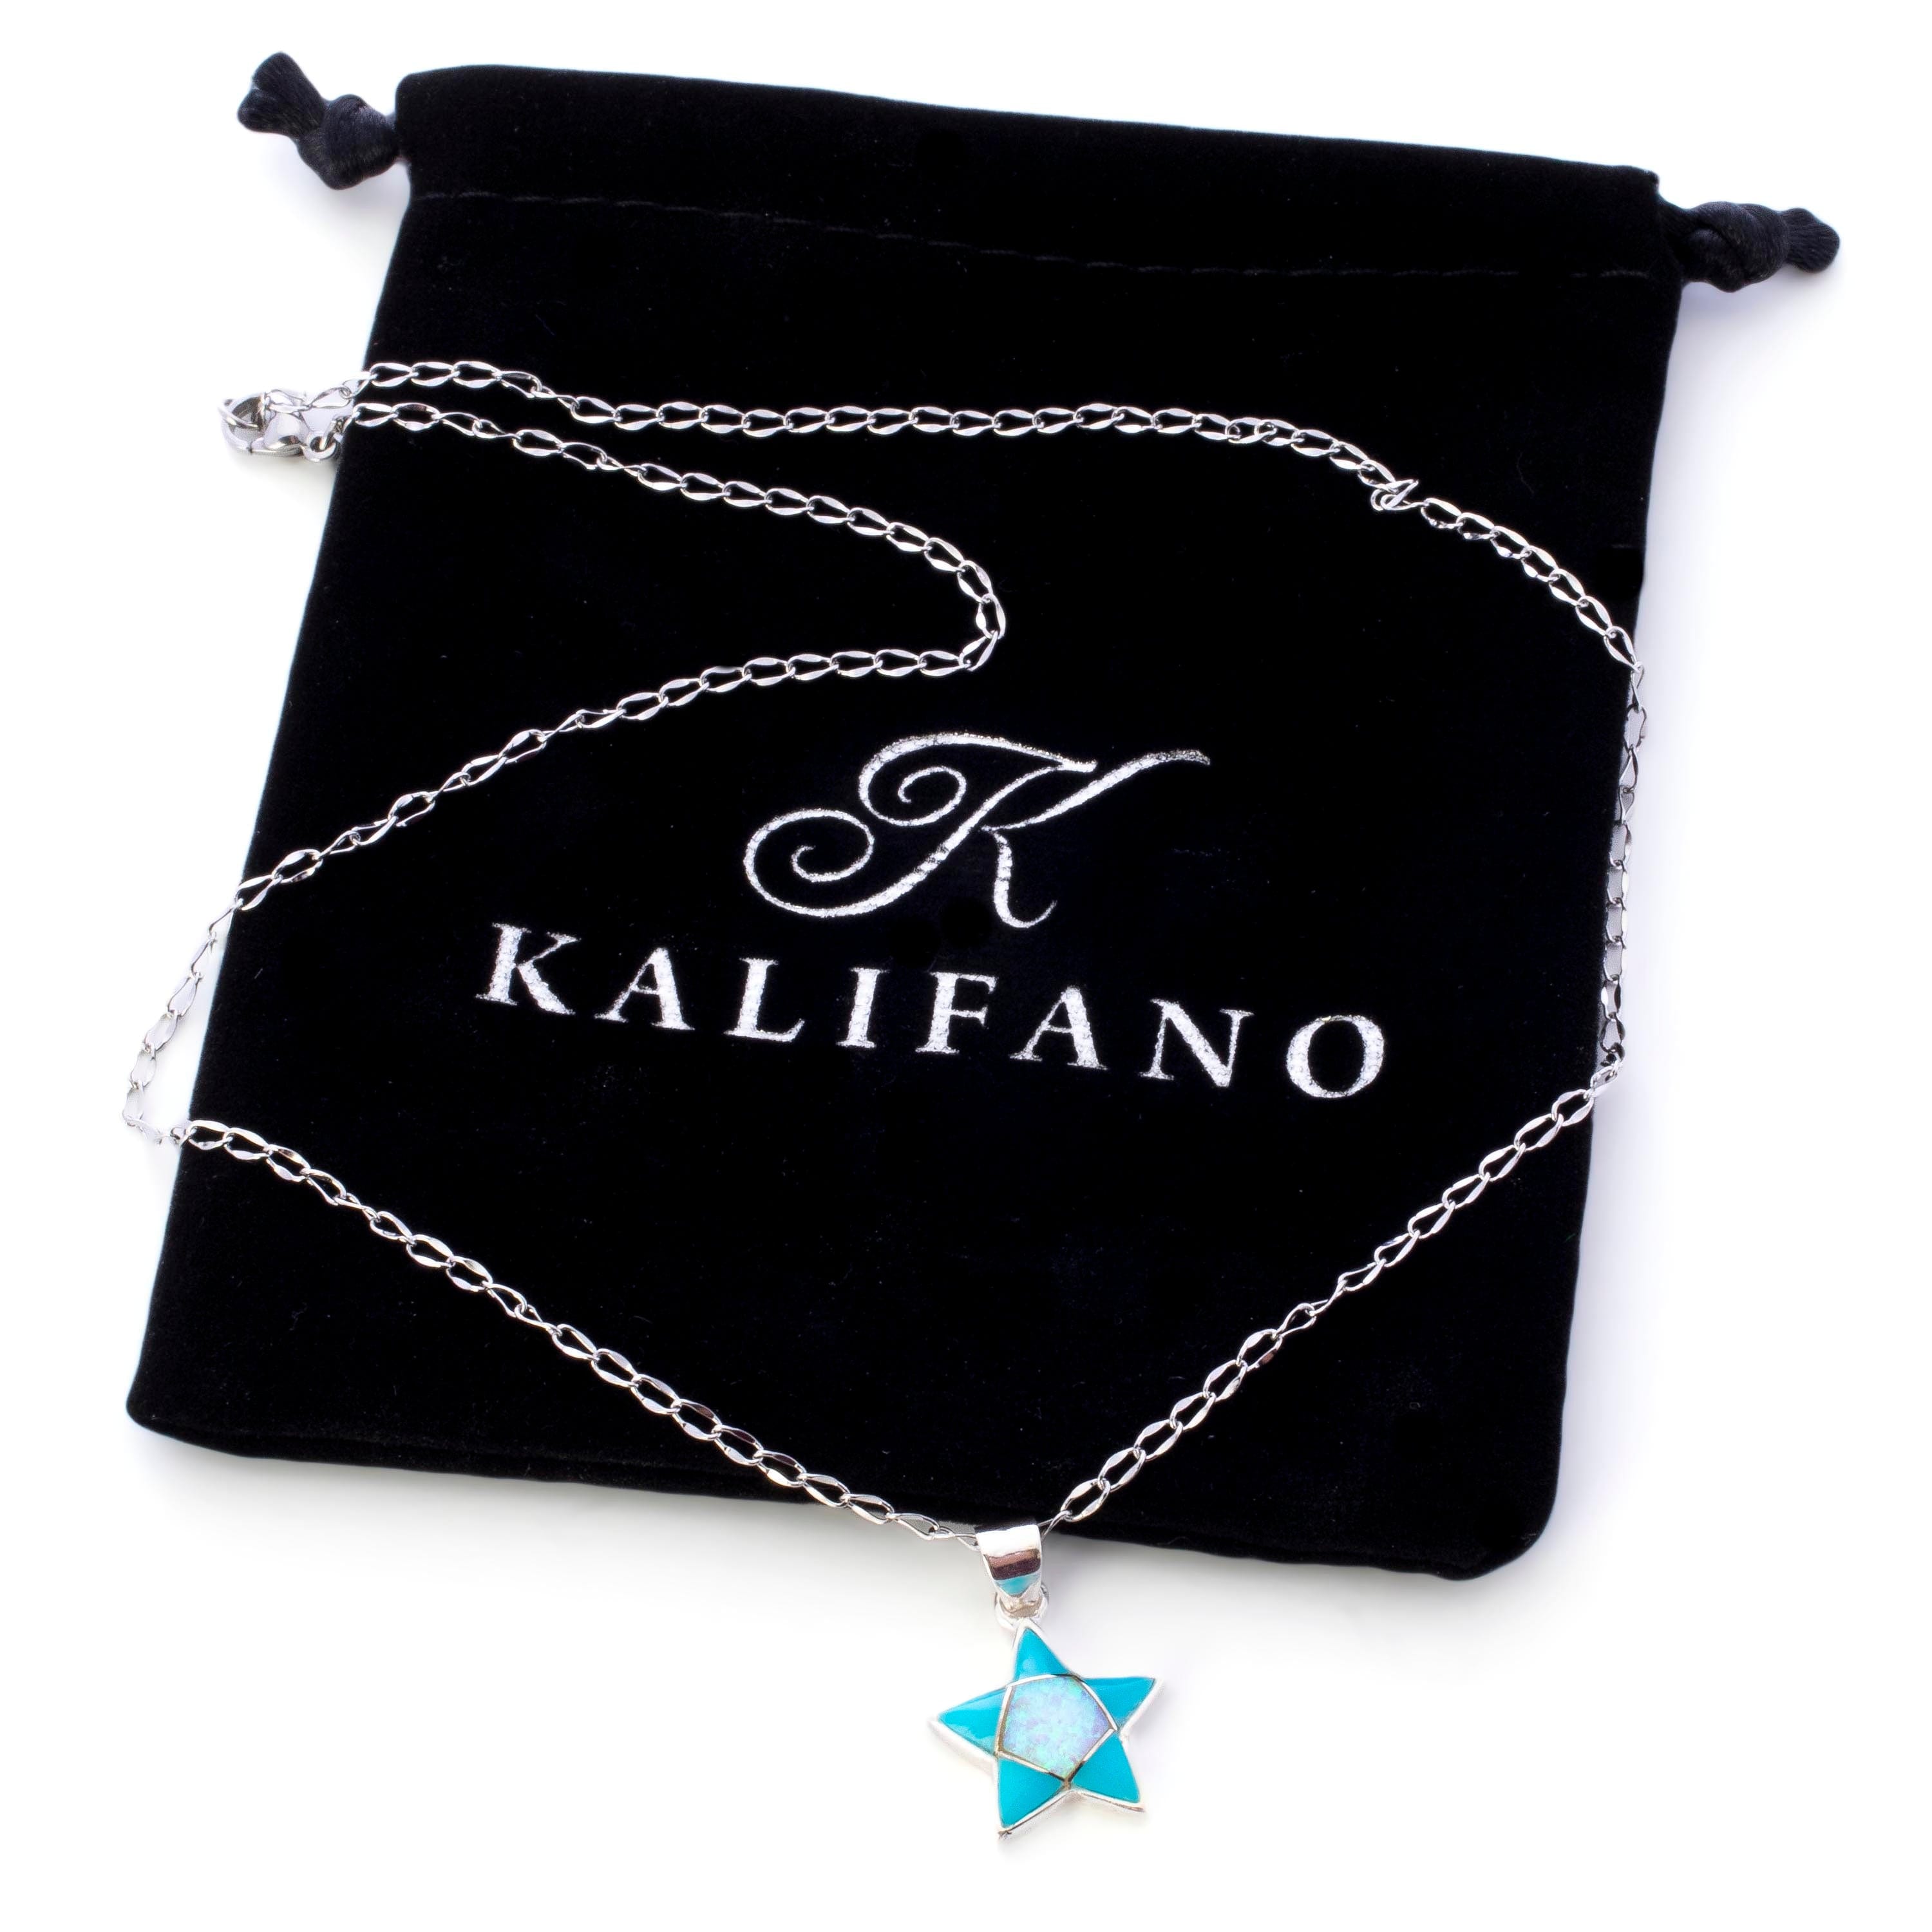 Kalifano Southwest Silver Jewelry Turquoise Star 925 Sterling Silver Pendant USA Handmade with Opal Accent NMN.2243.TQ